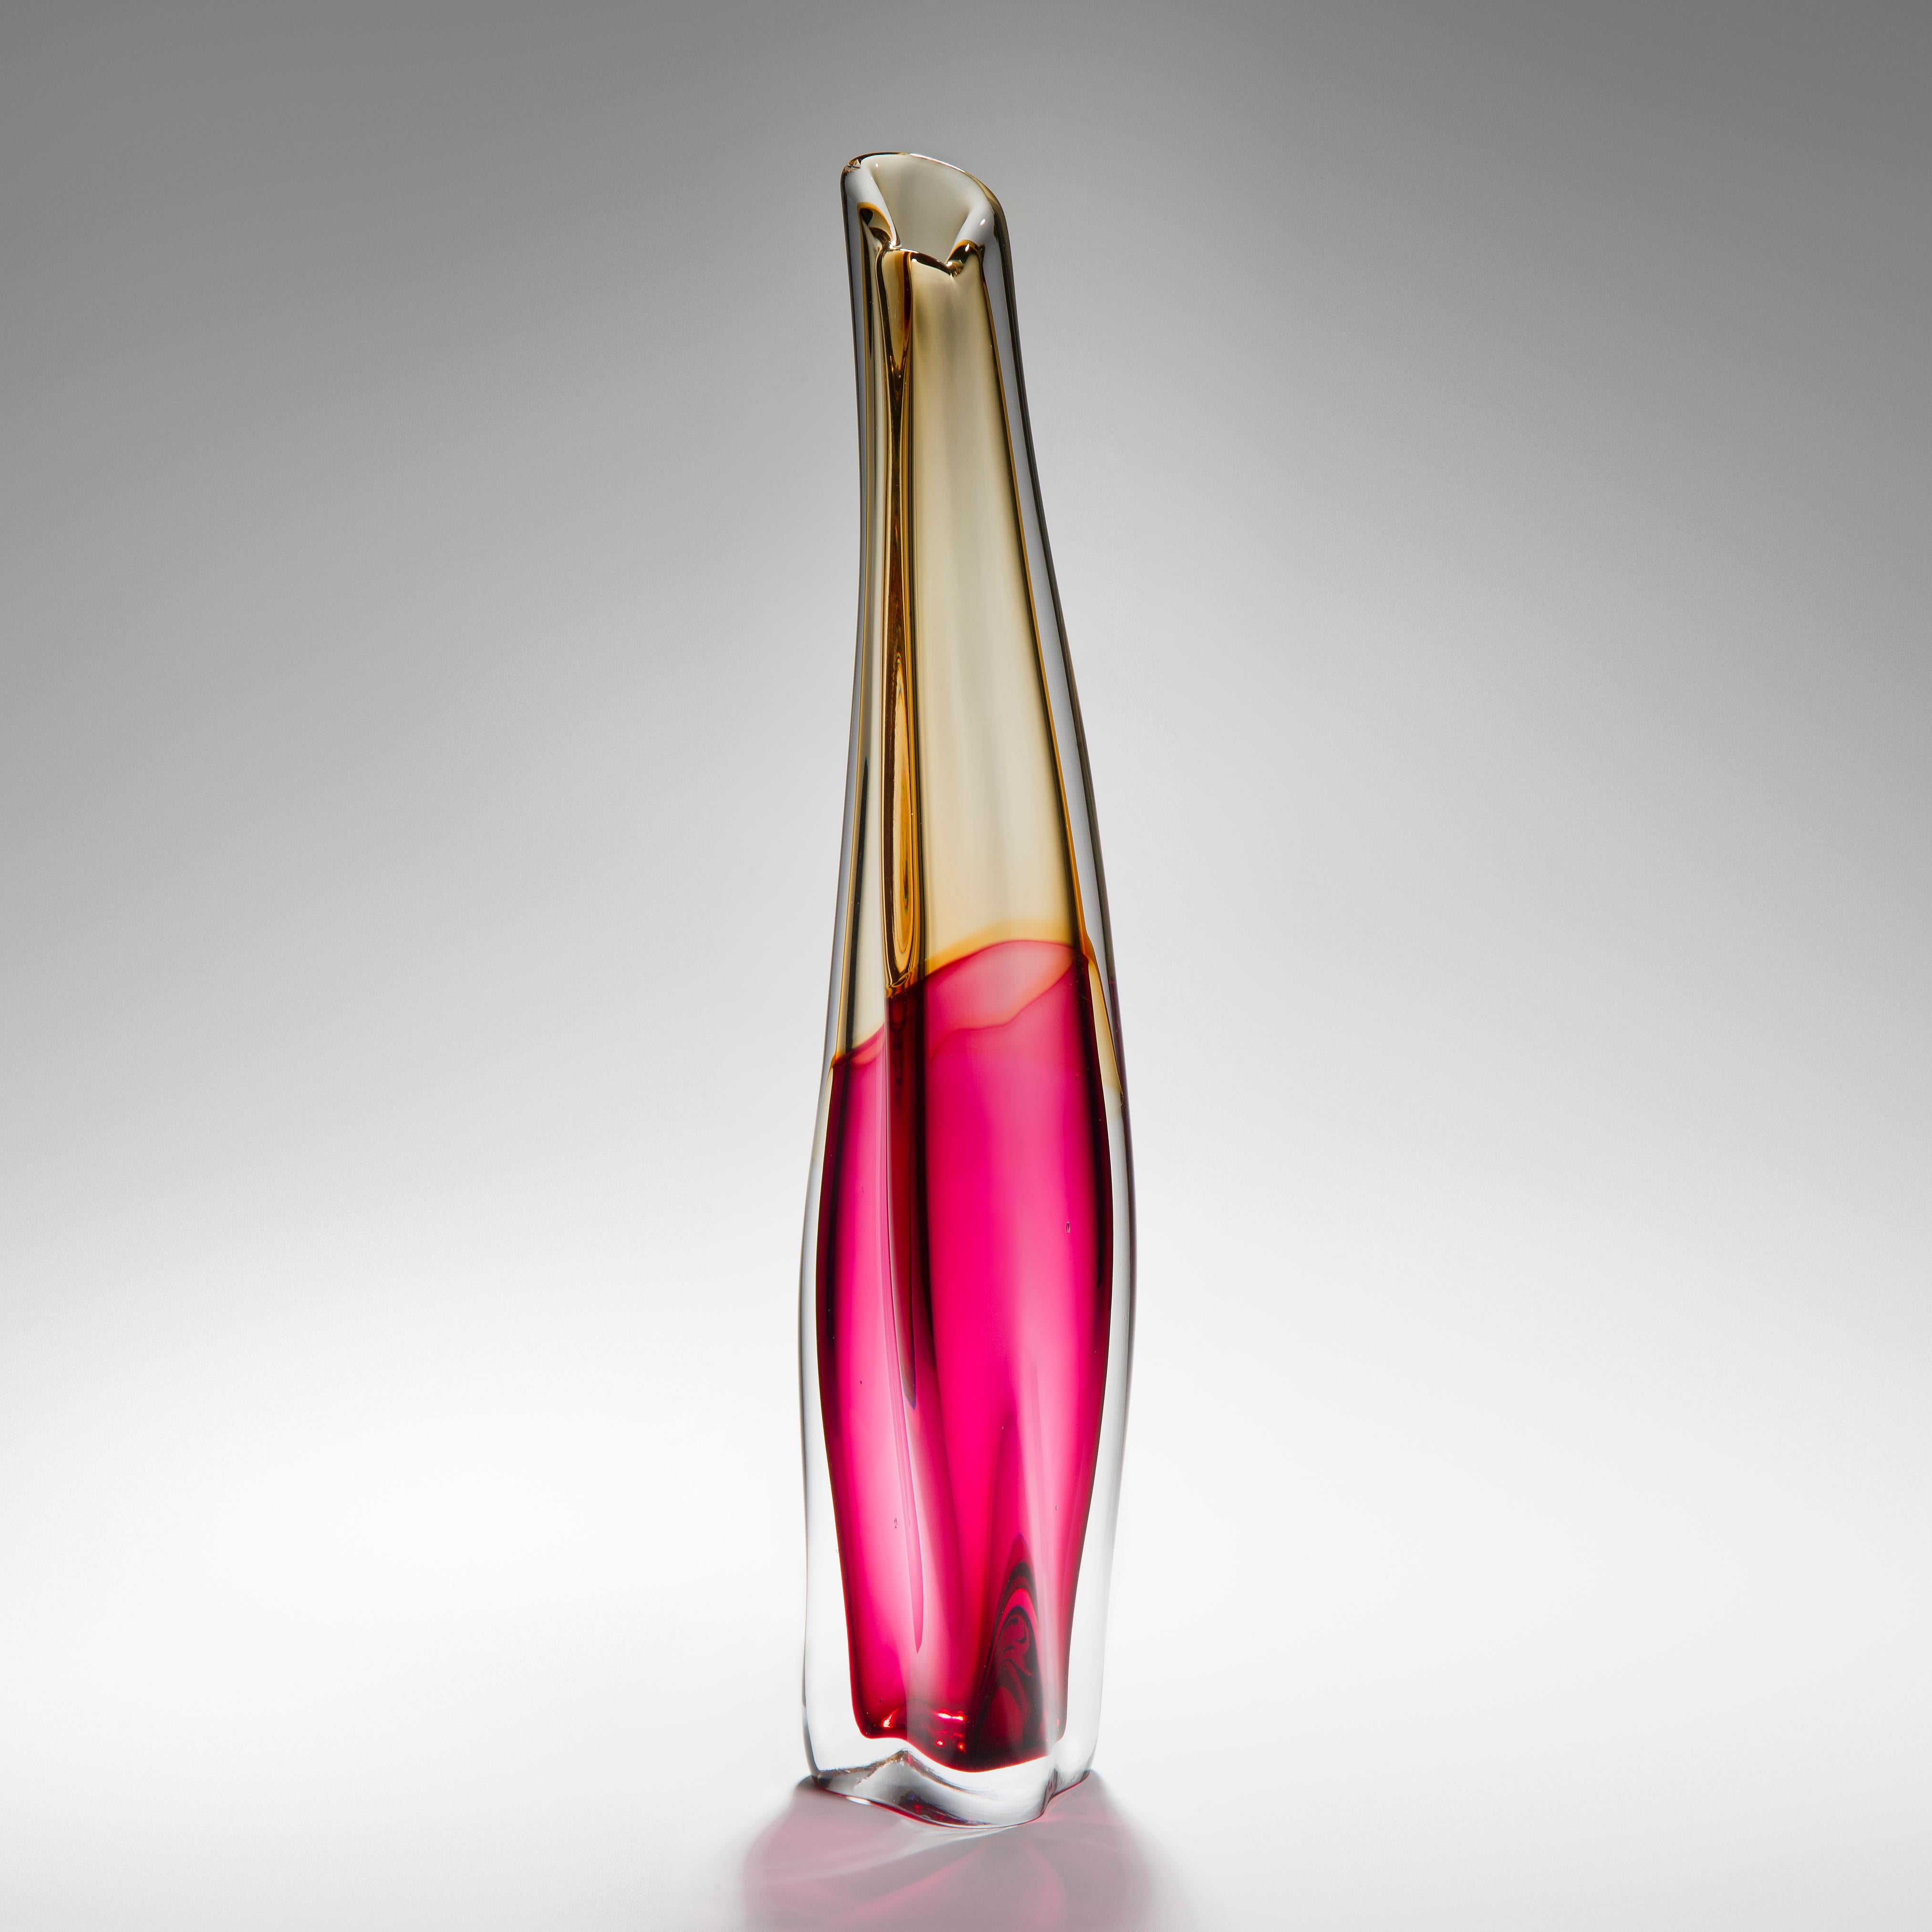 'Sommercalmo 142' is a unique hand blown sculptural vase by the British artist Vic Bamforth. Soft golden yellow and striking hot pink meet and are encased in clear glass to create this stunning piece. With soft, twisting lines, the form has dynamic